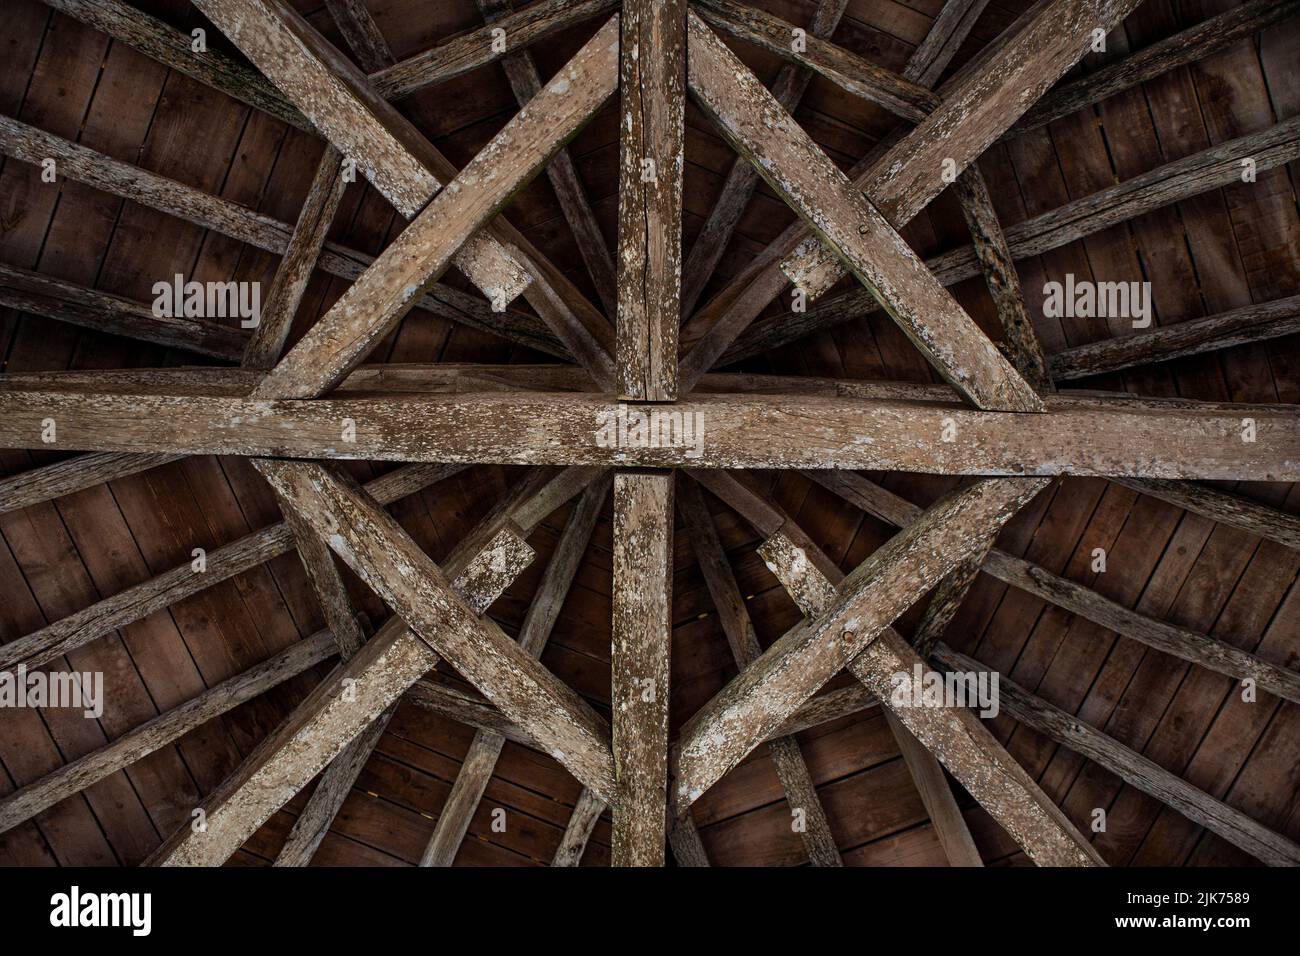 View of an old wooden framework Stock Photo